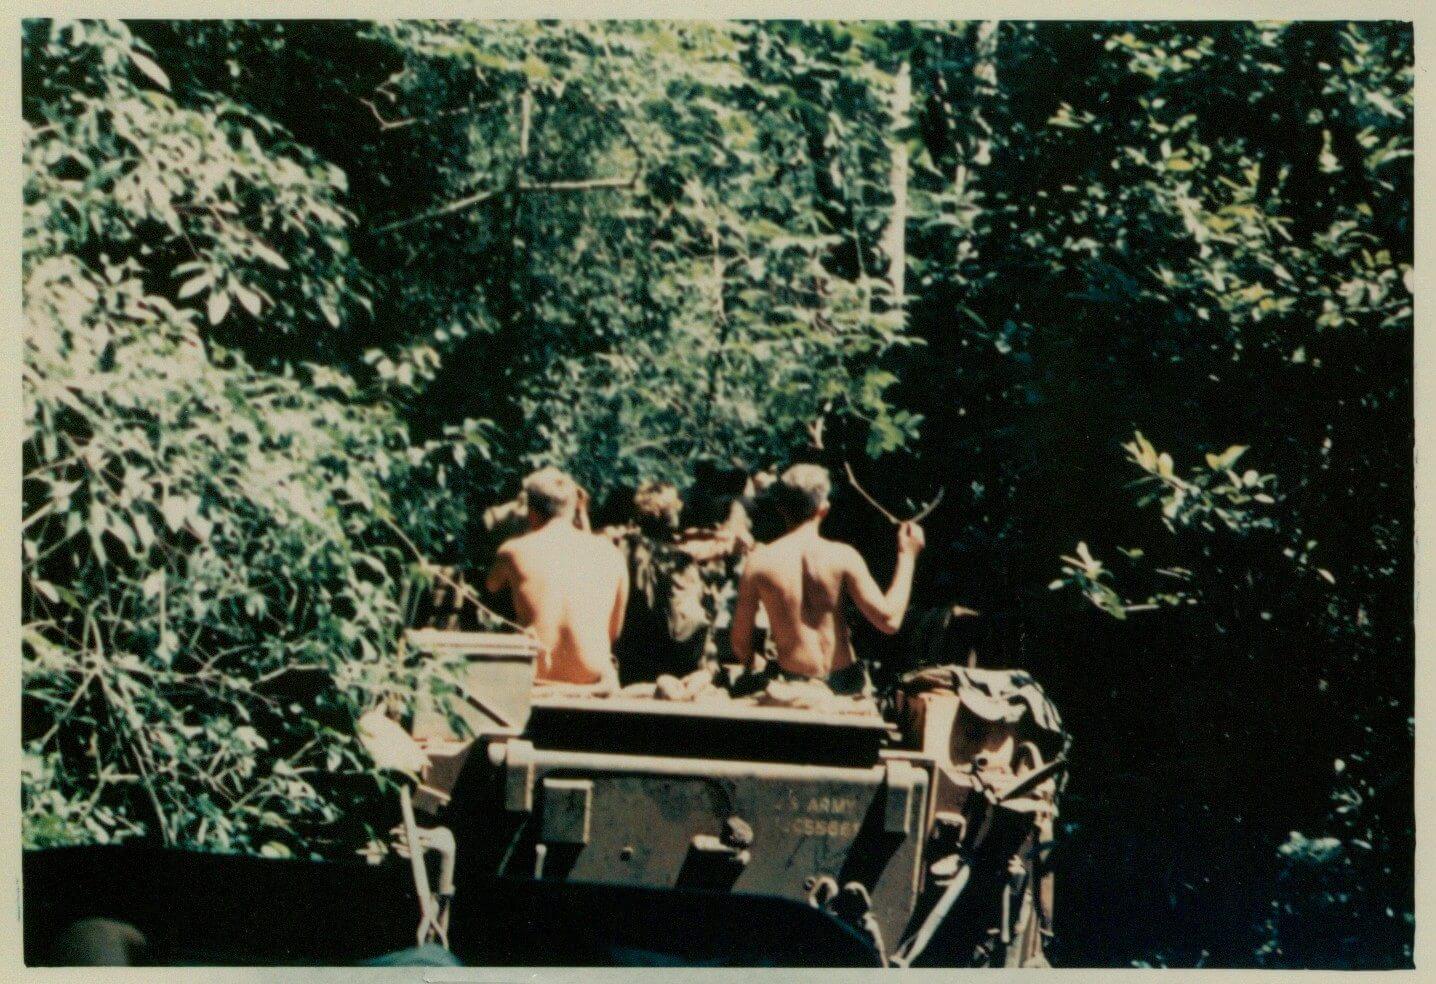 A military vehicle from the rear, driving into the jungle.